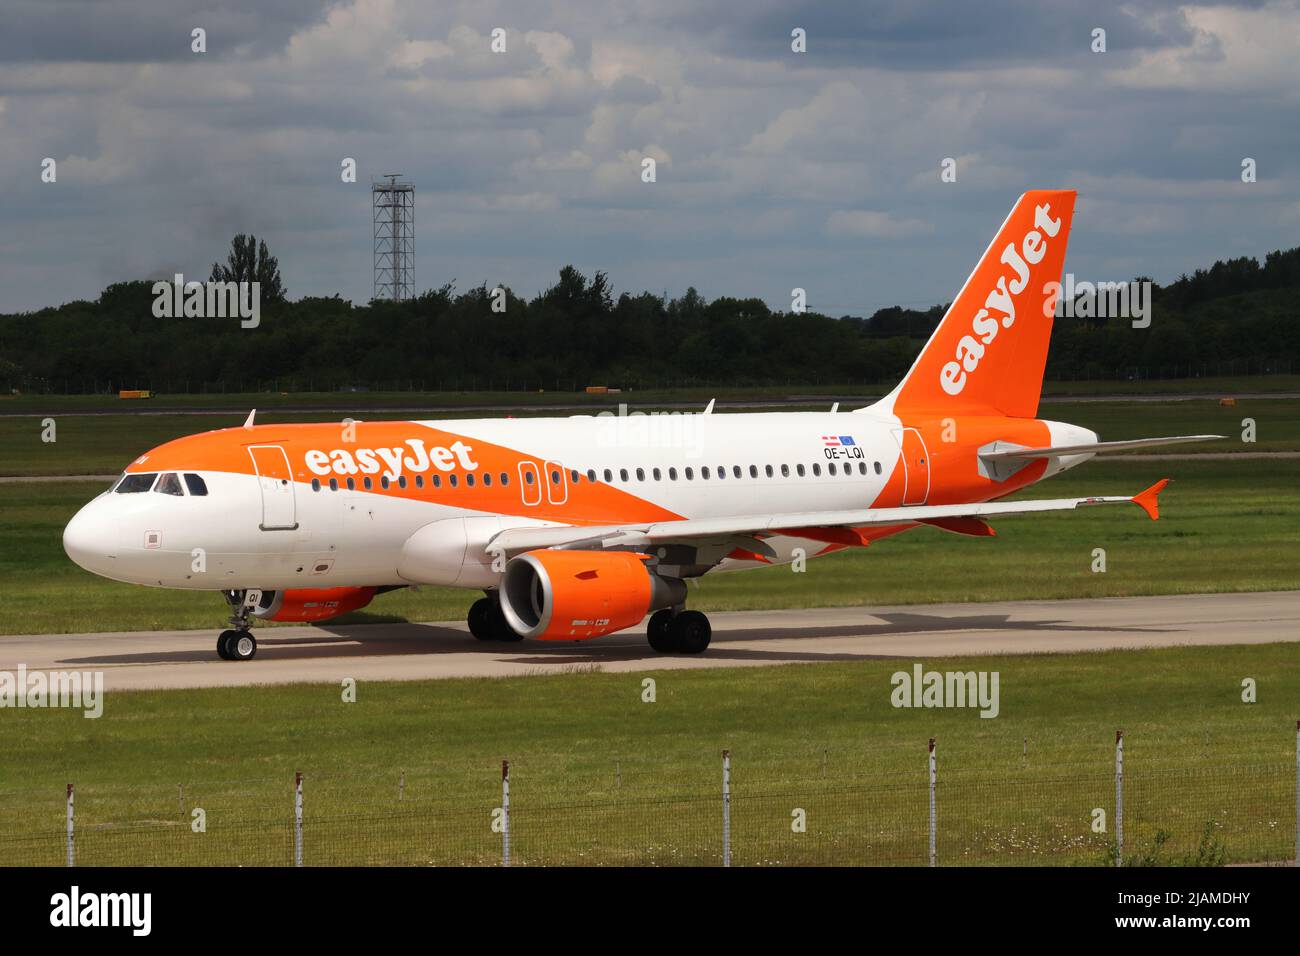 OE-LQI Airbus 319, Easyjet, Stansted Airport, Stansted, Essex, UK Stock Photo